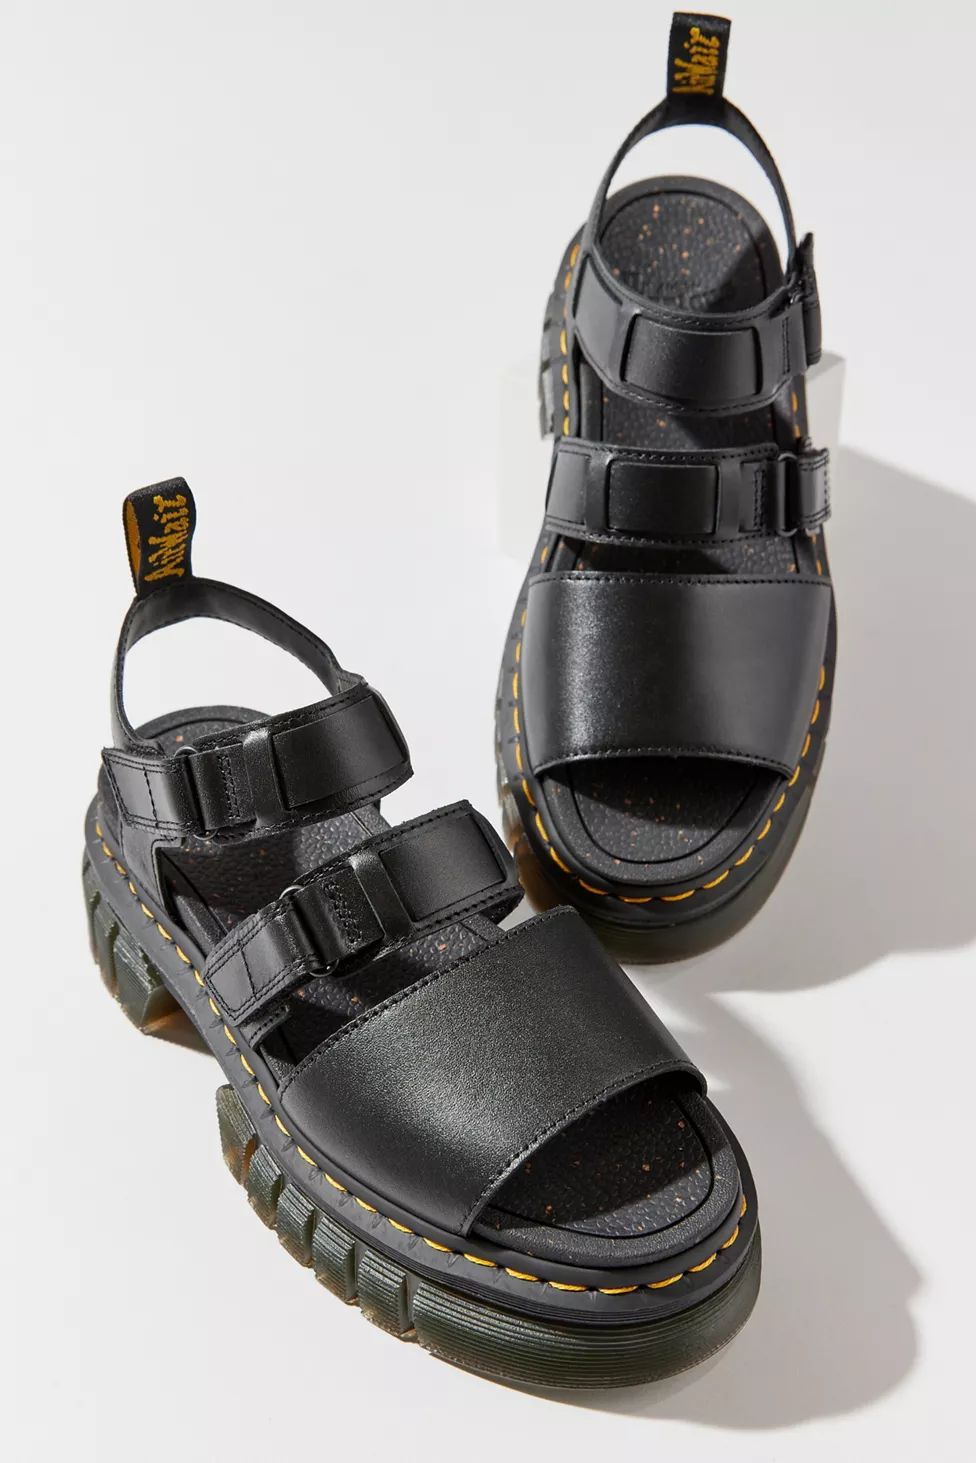 Dr. Martens Ricki Leather 3-Strap Platform Sandal | Urban Outfitters (US and RoW)